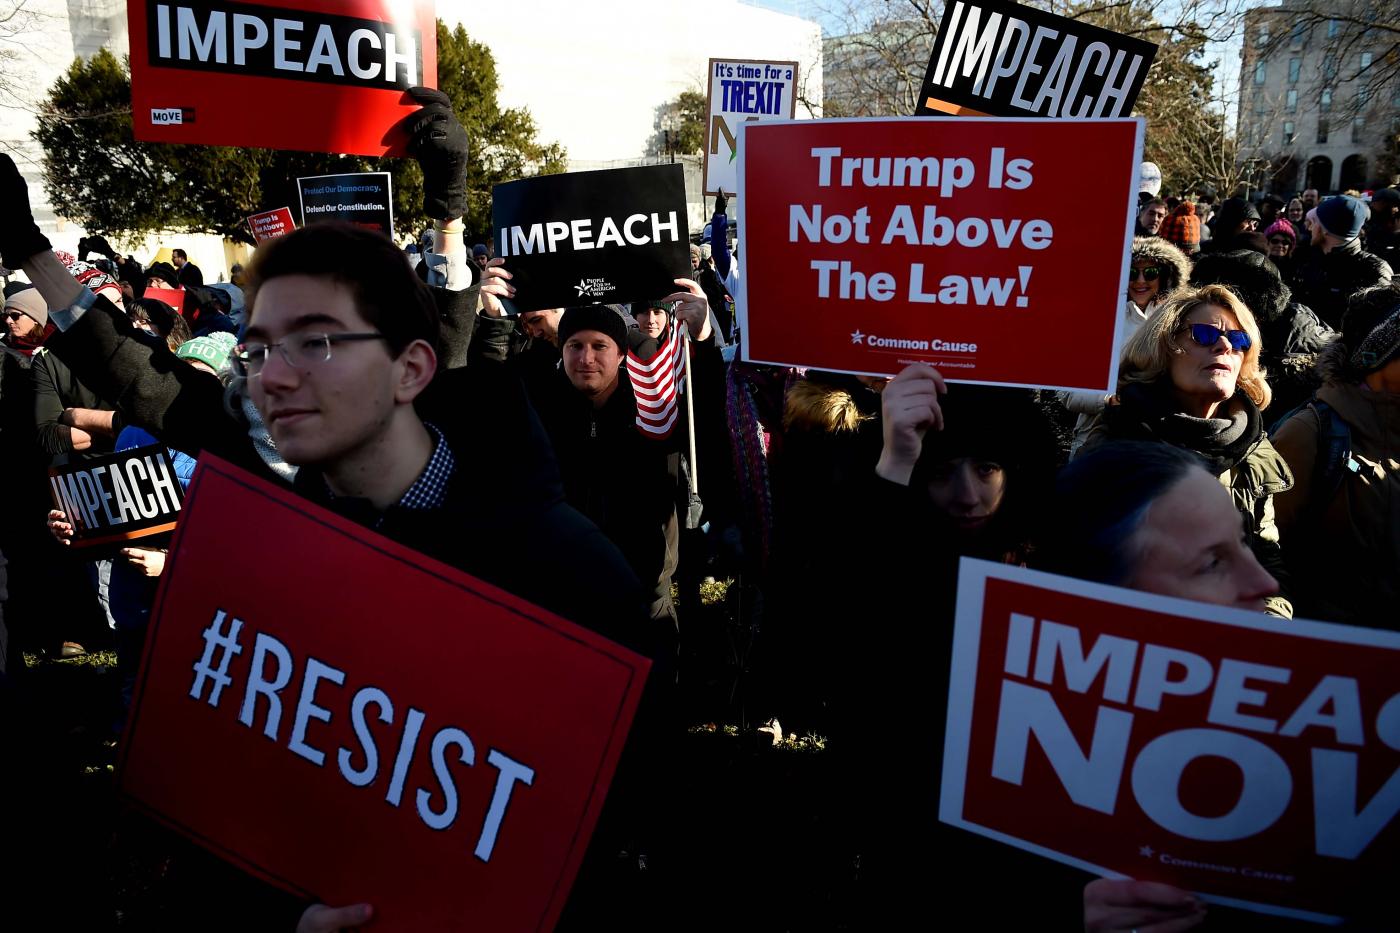 Trump Impeachment: Here's What Arab and Muslim Americans Say about it